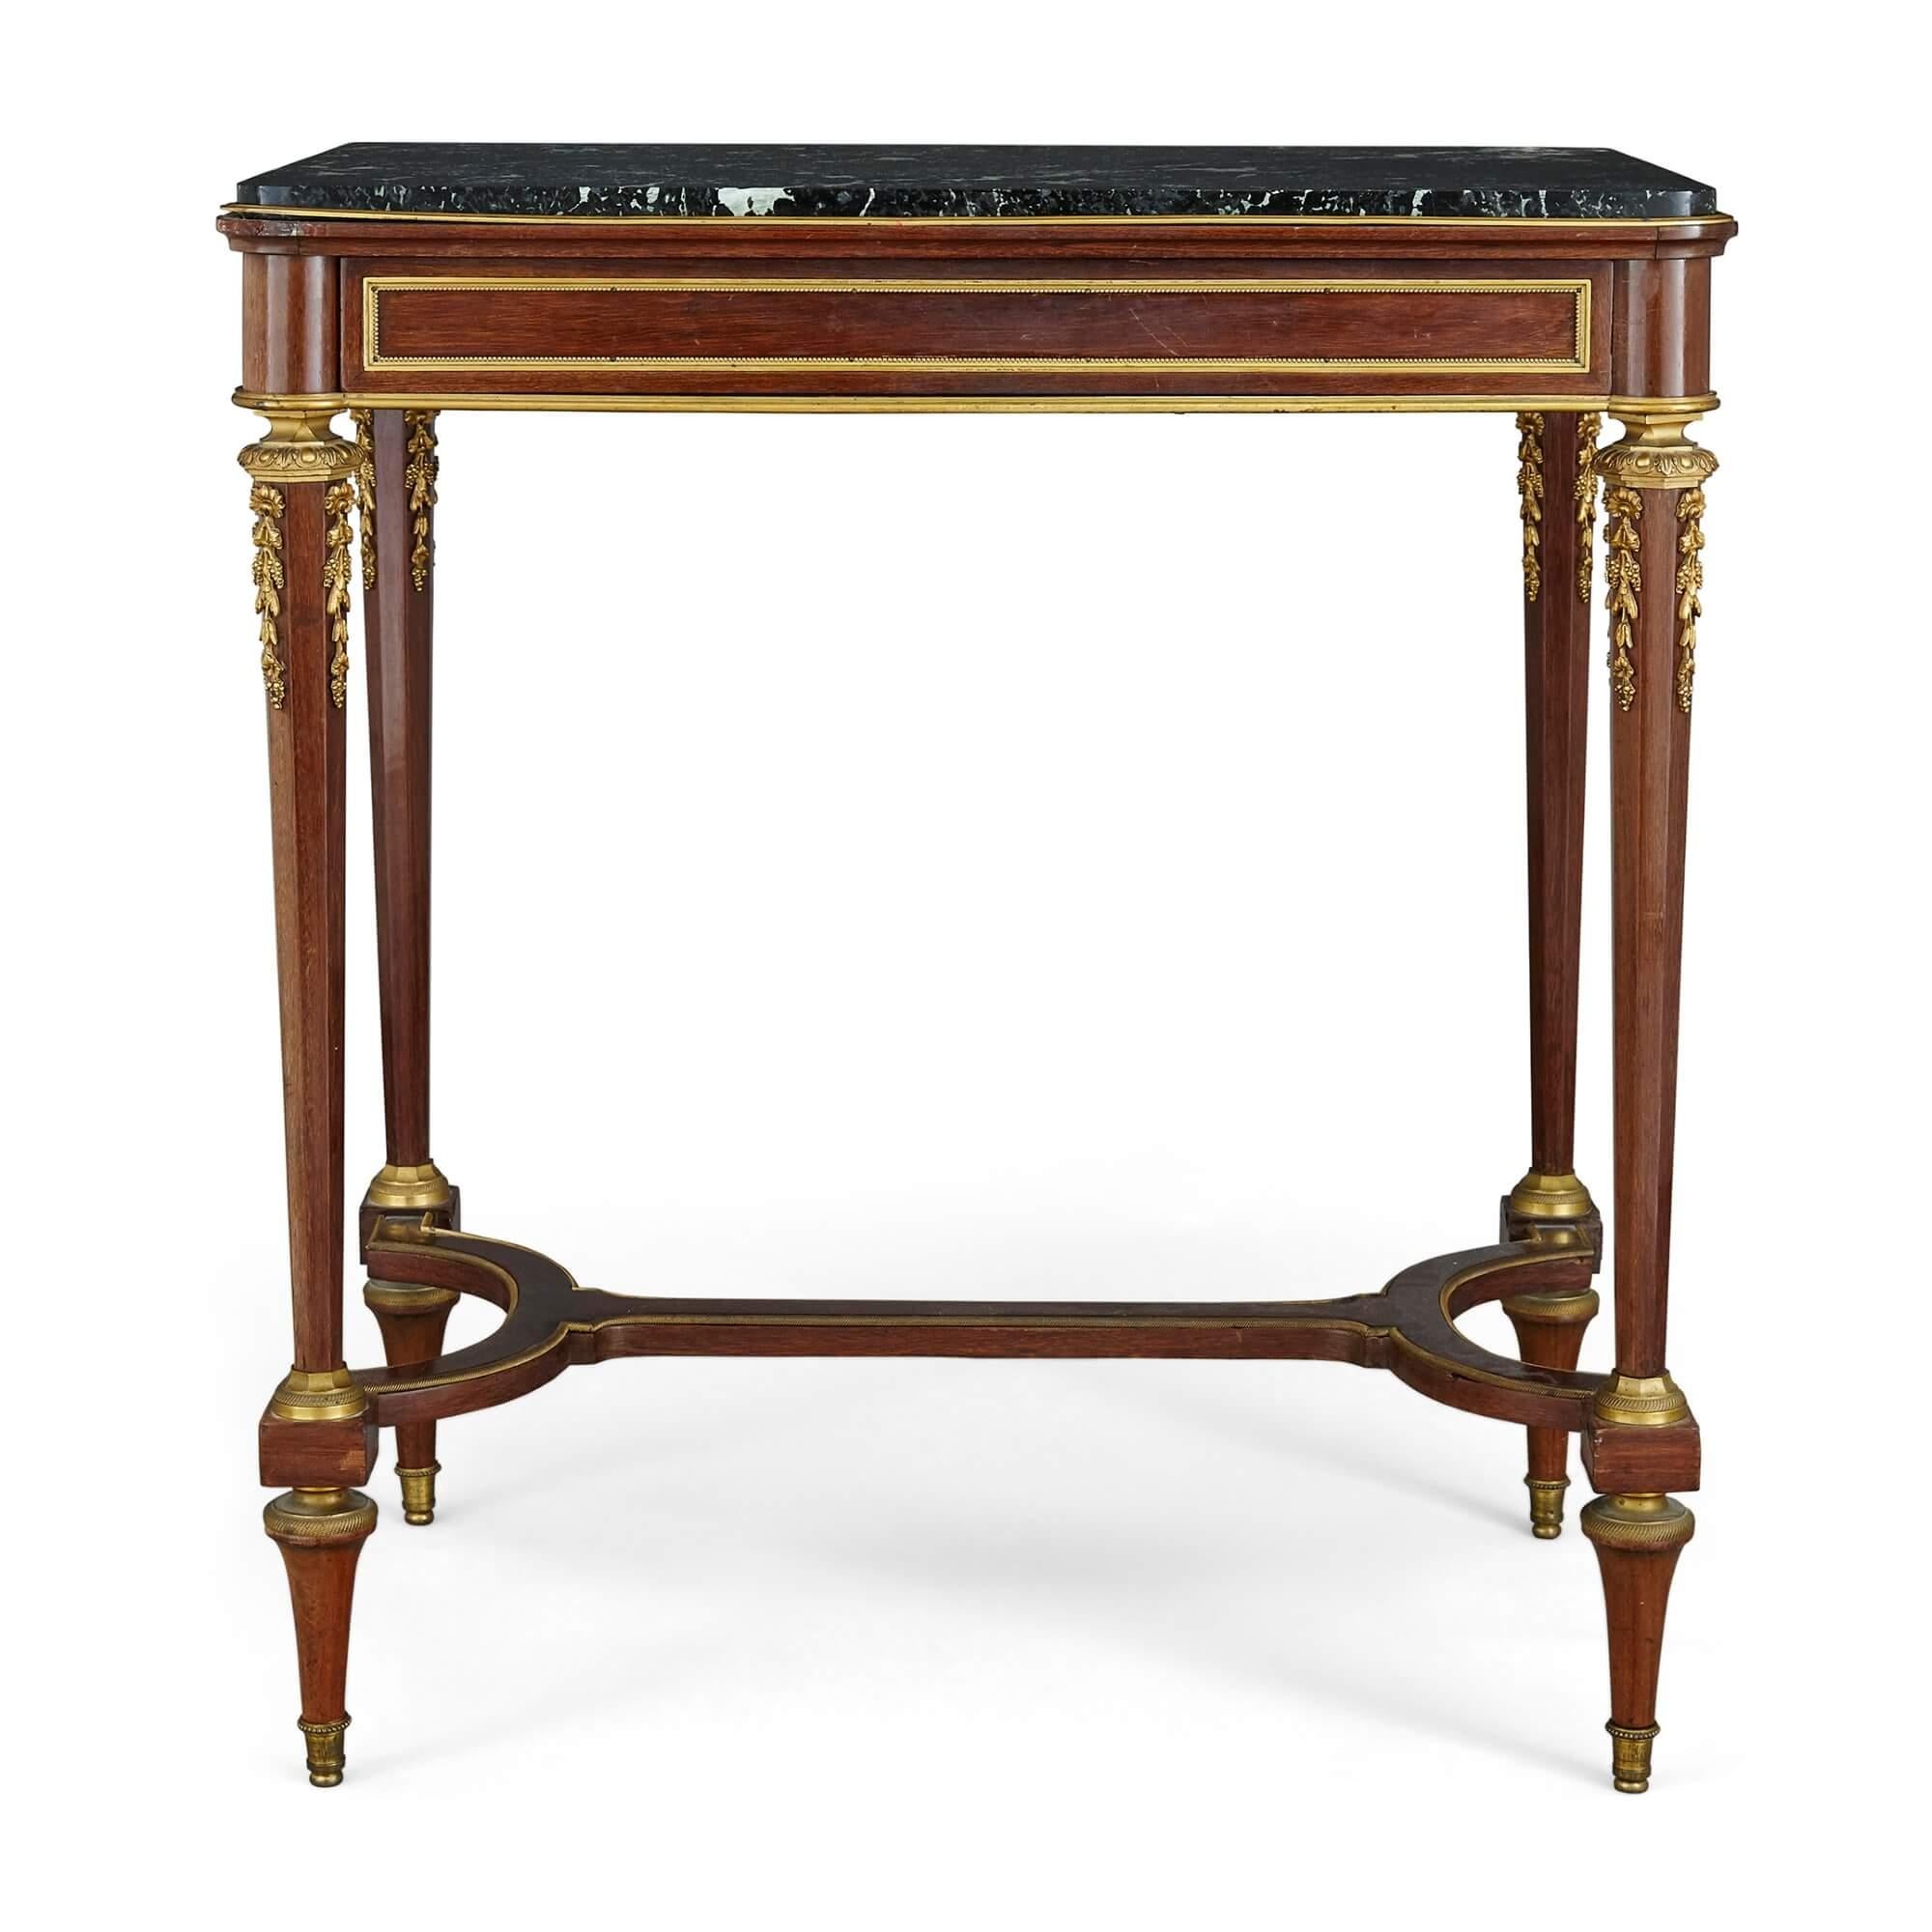 Gilt bronze mounted Neoclassical style side table by Thiébaut Frères
French, 19th century
Measures: Height 75cm, width 68cm, depth 45cm

This charming side table is crafted from wood, gilt bronze, and marble. The table features a rectangular